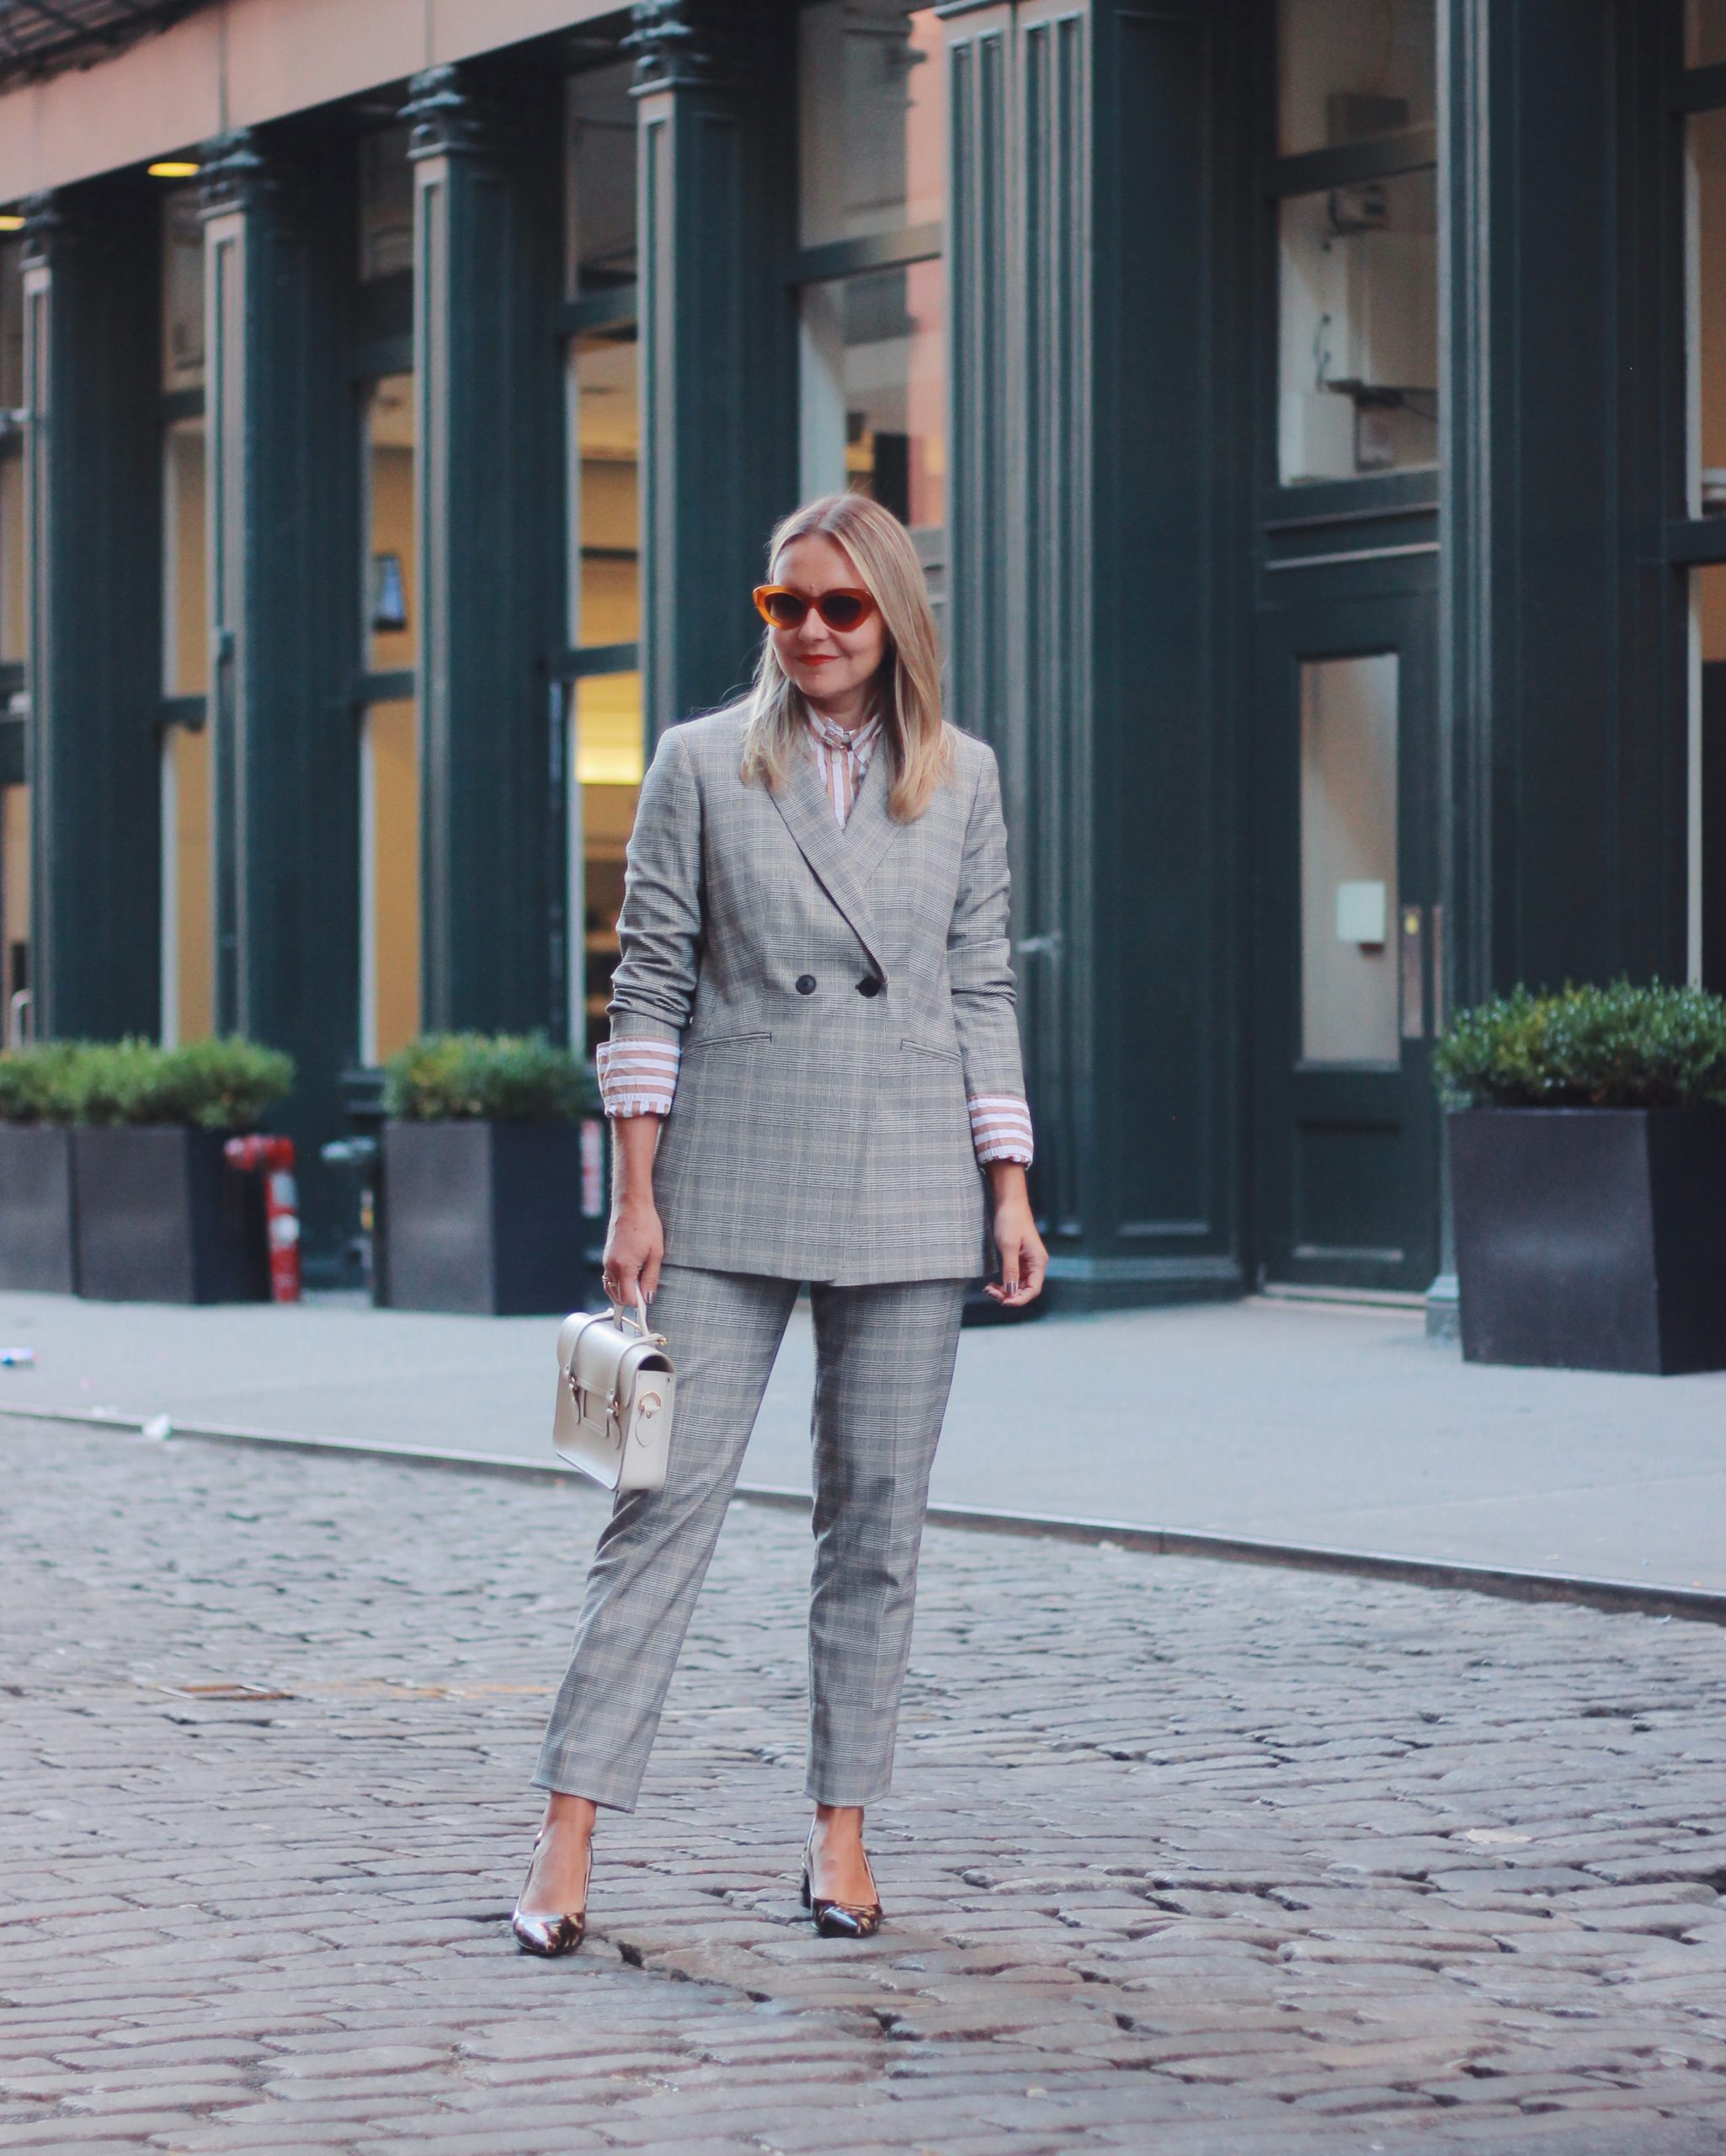 A HYBRID WARDROBE FOR WORK TO WEEKEND - The Steele Maiden